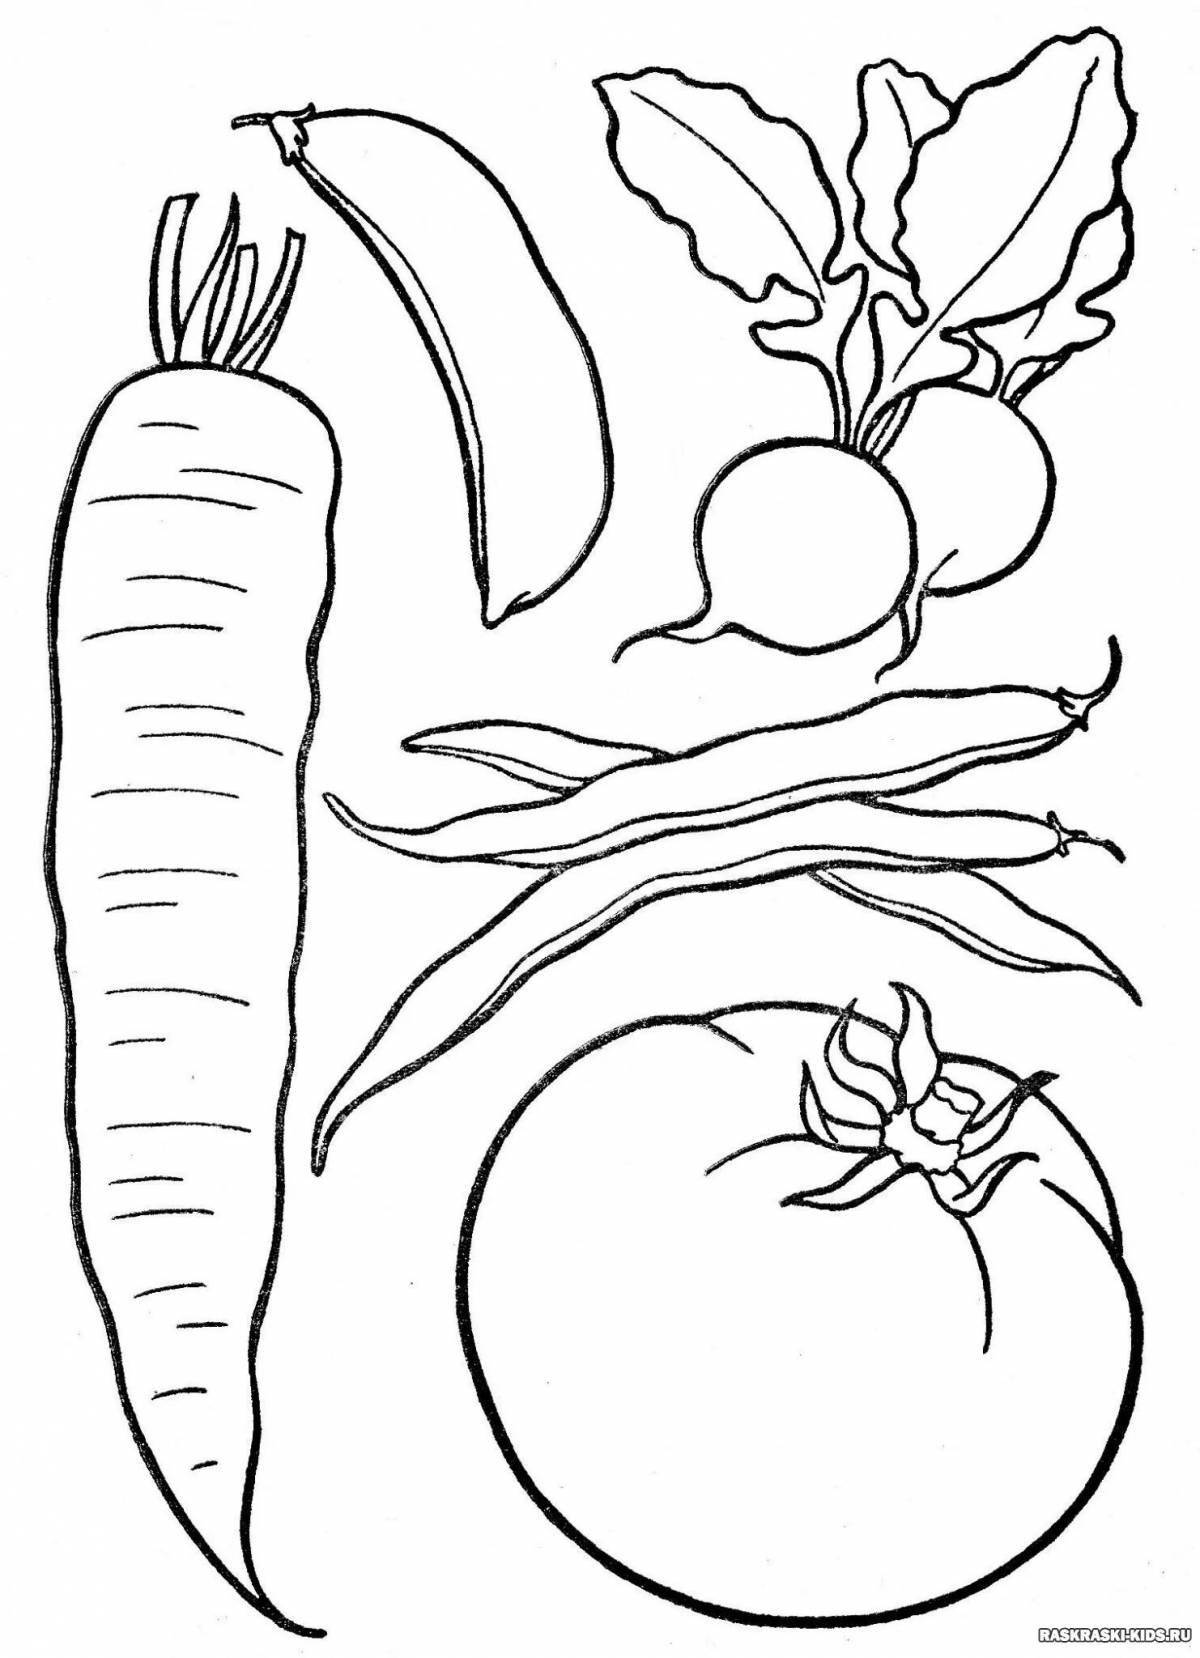 Fun coloring of vegetables for babies